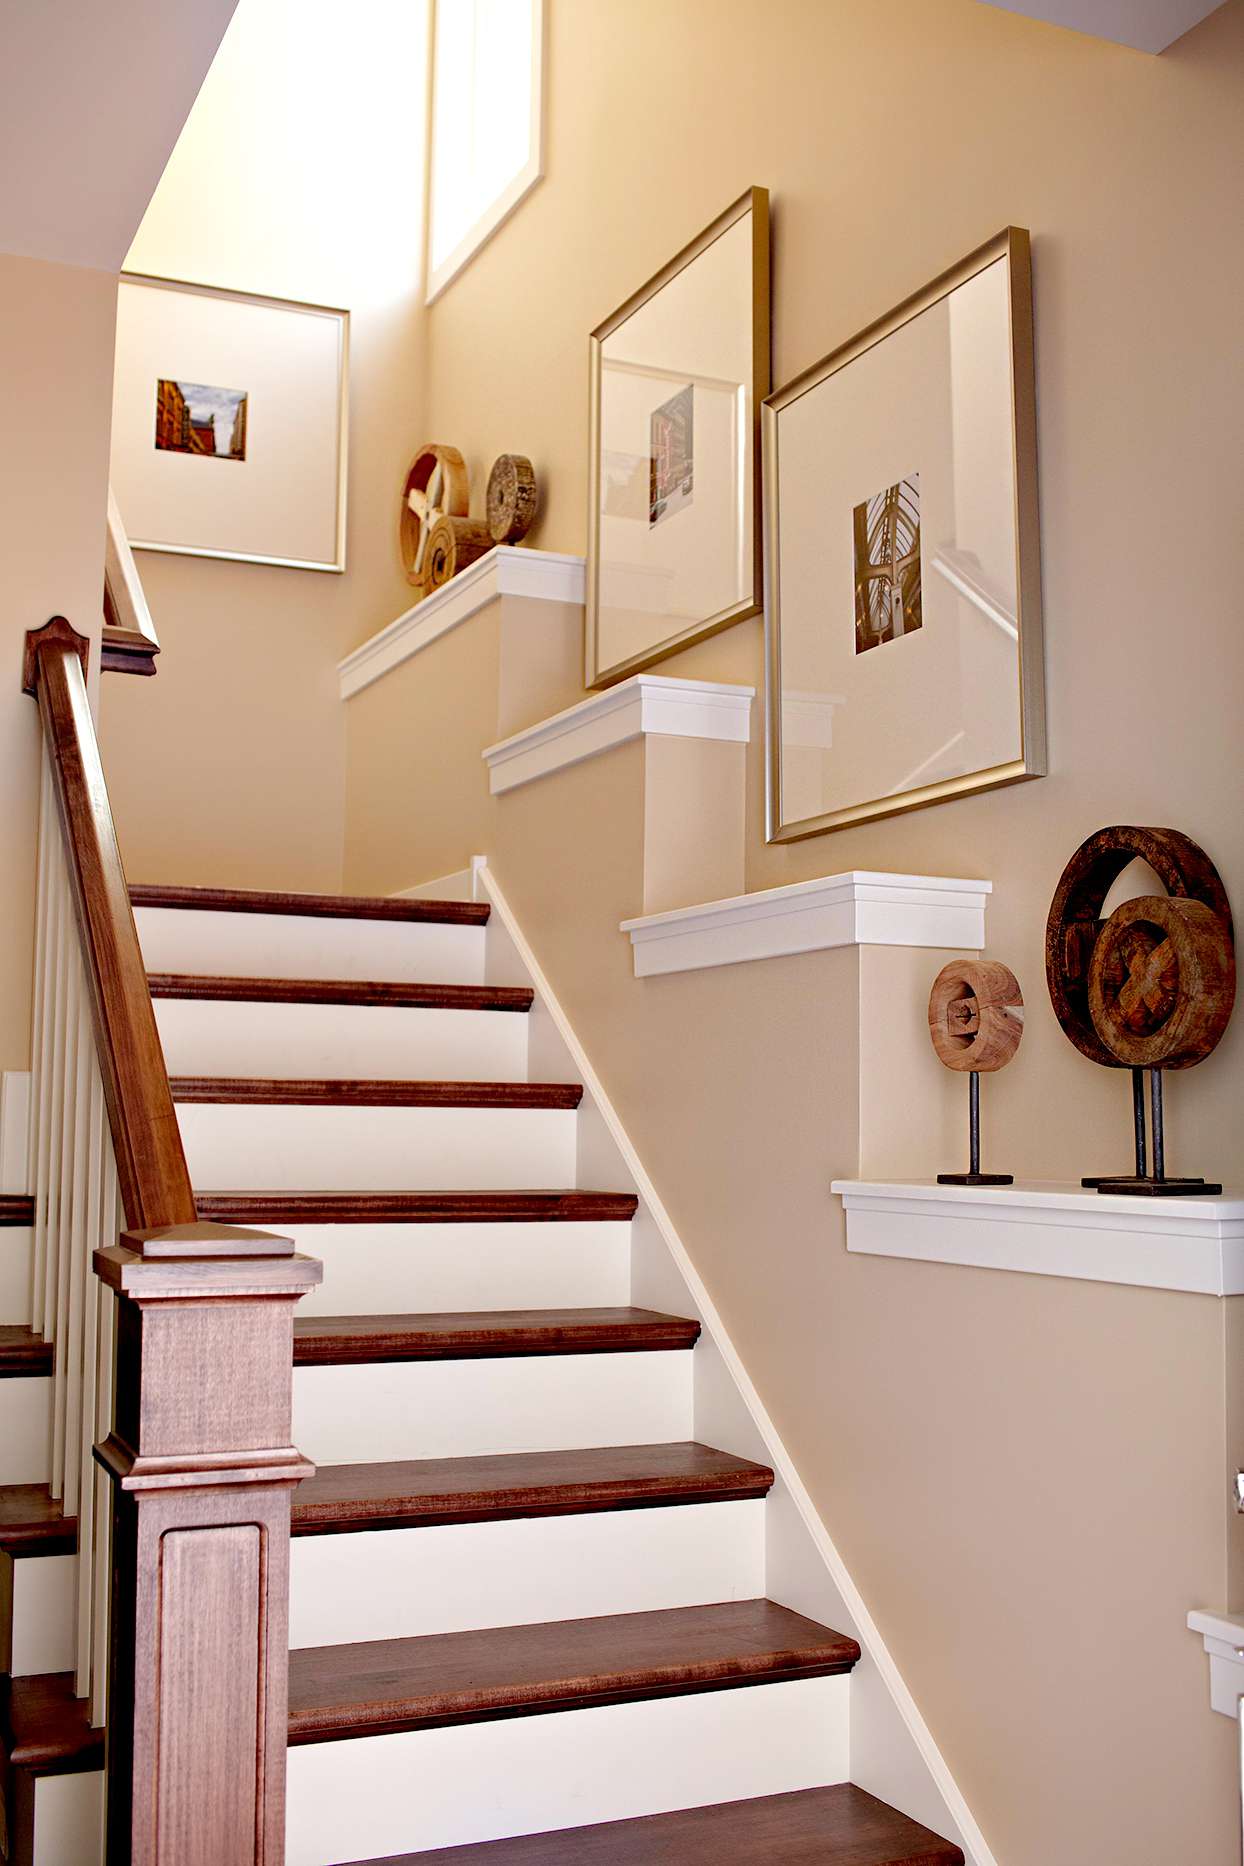 Stairwell with décor and artwork